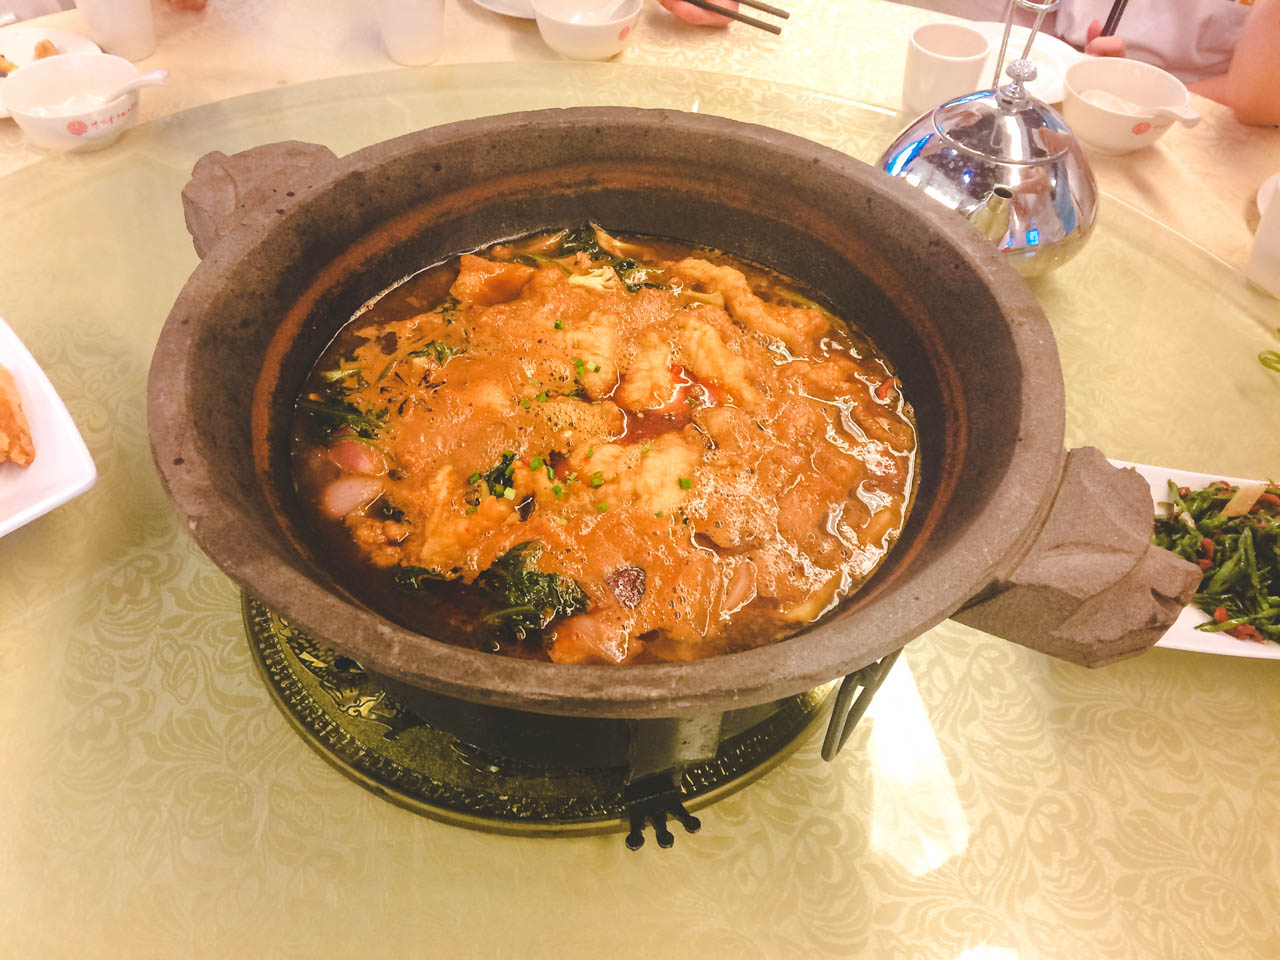 A Chinese dish inside a round clay dish on a Lazy Susan rotating table